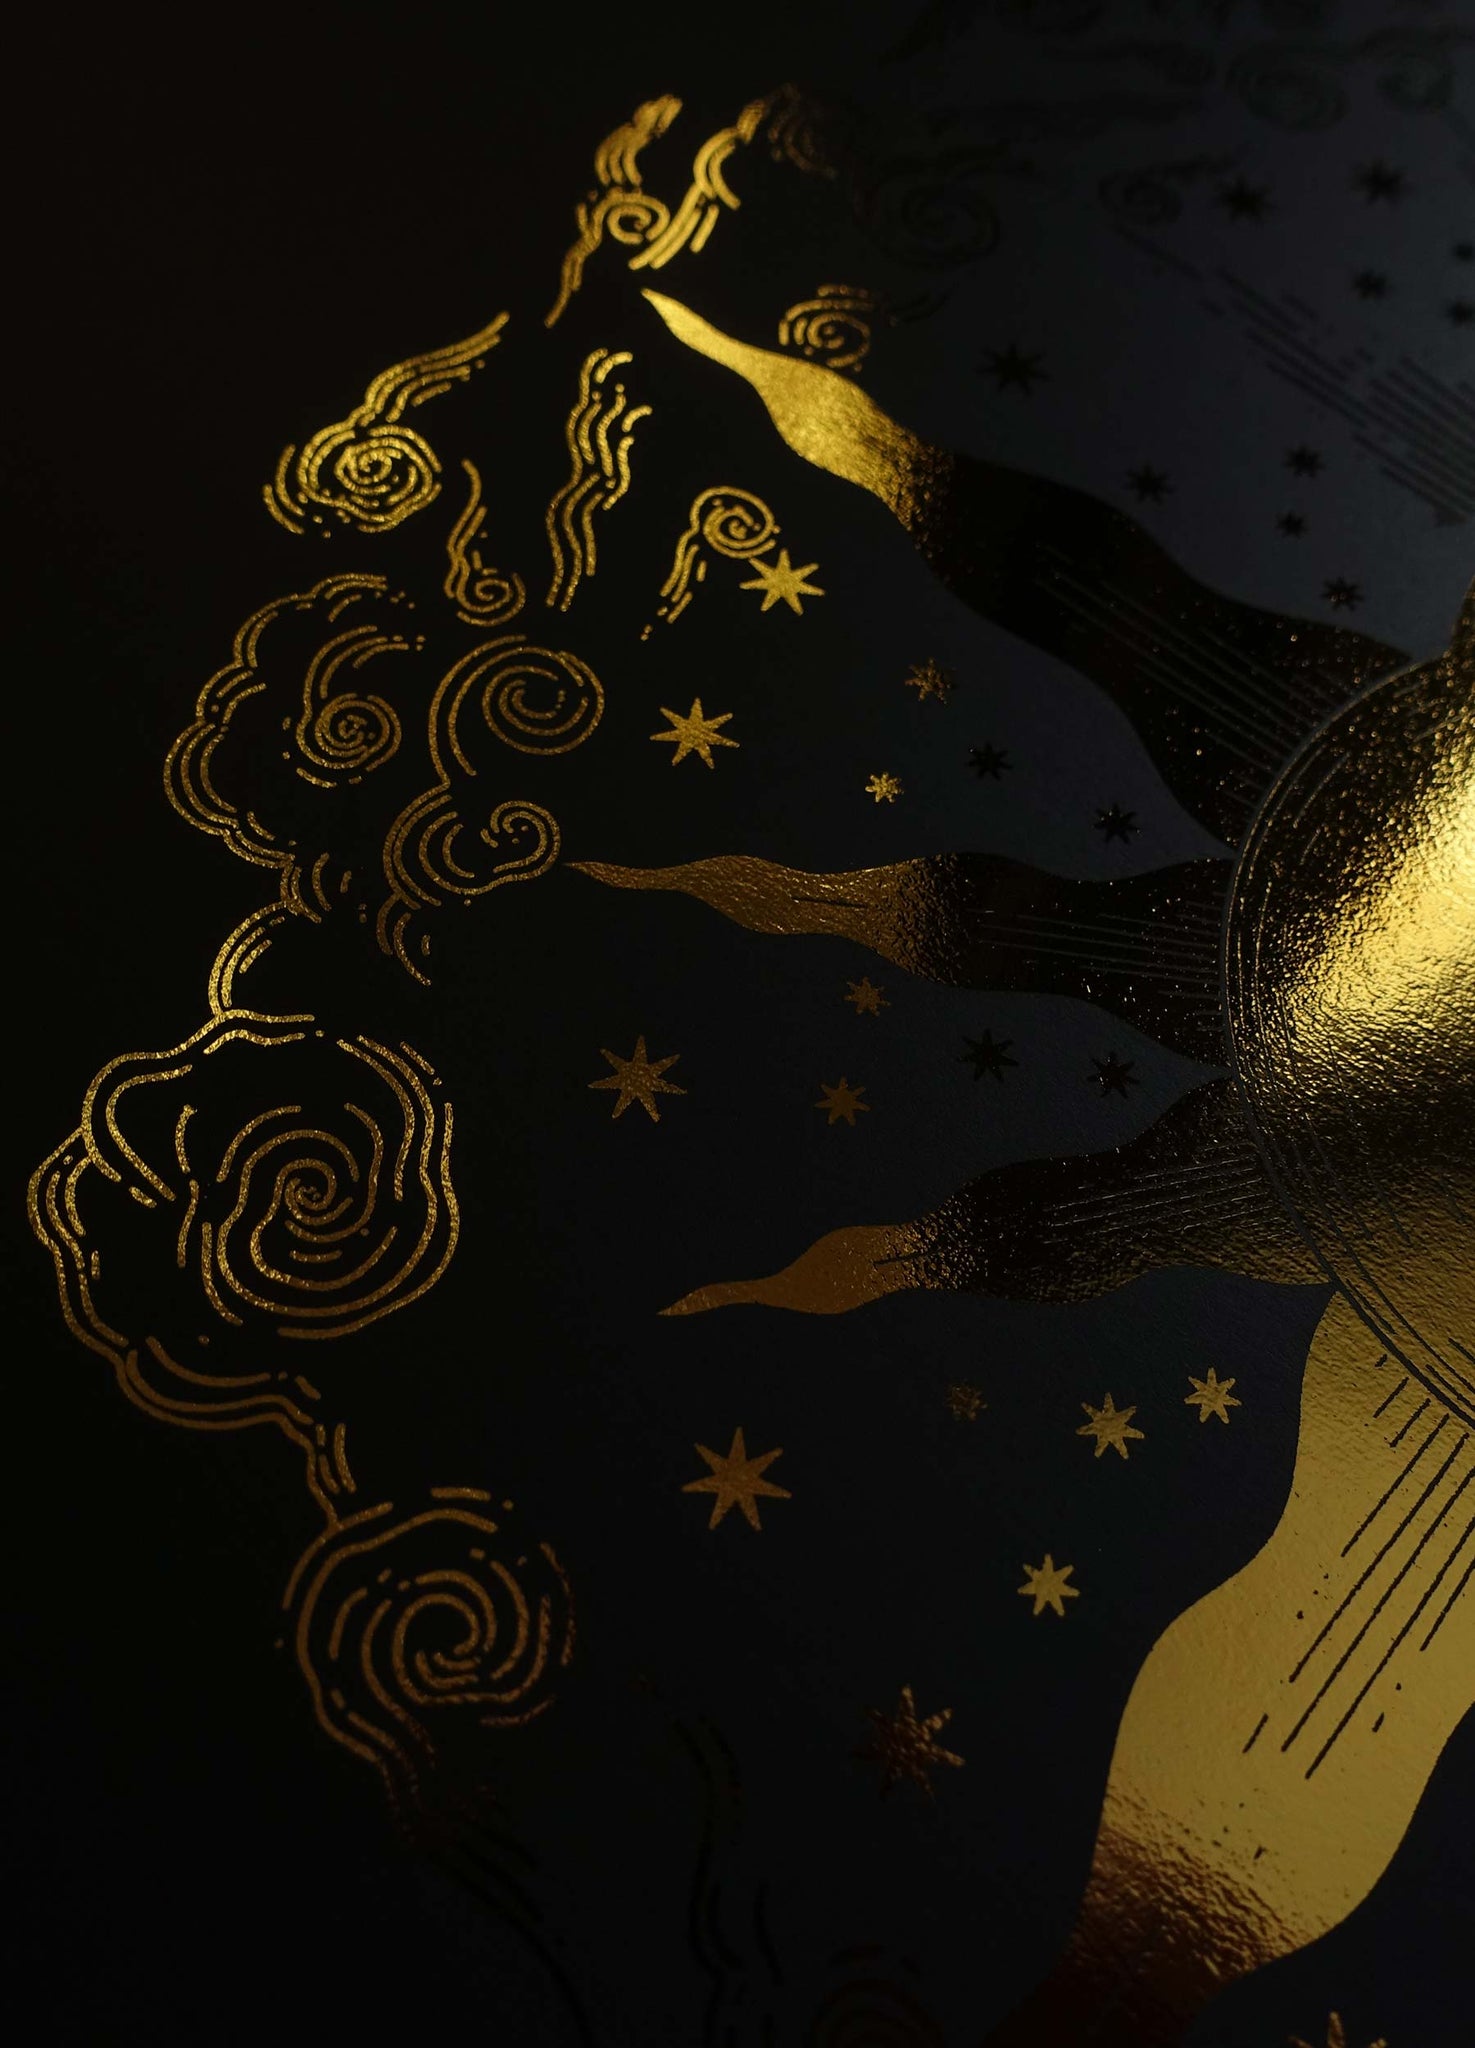 The Alchemical Wedding, a union of the sun and moon, gold foil print on black paper by Cocorrina & Co